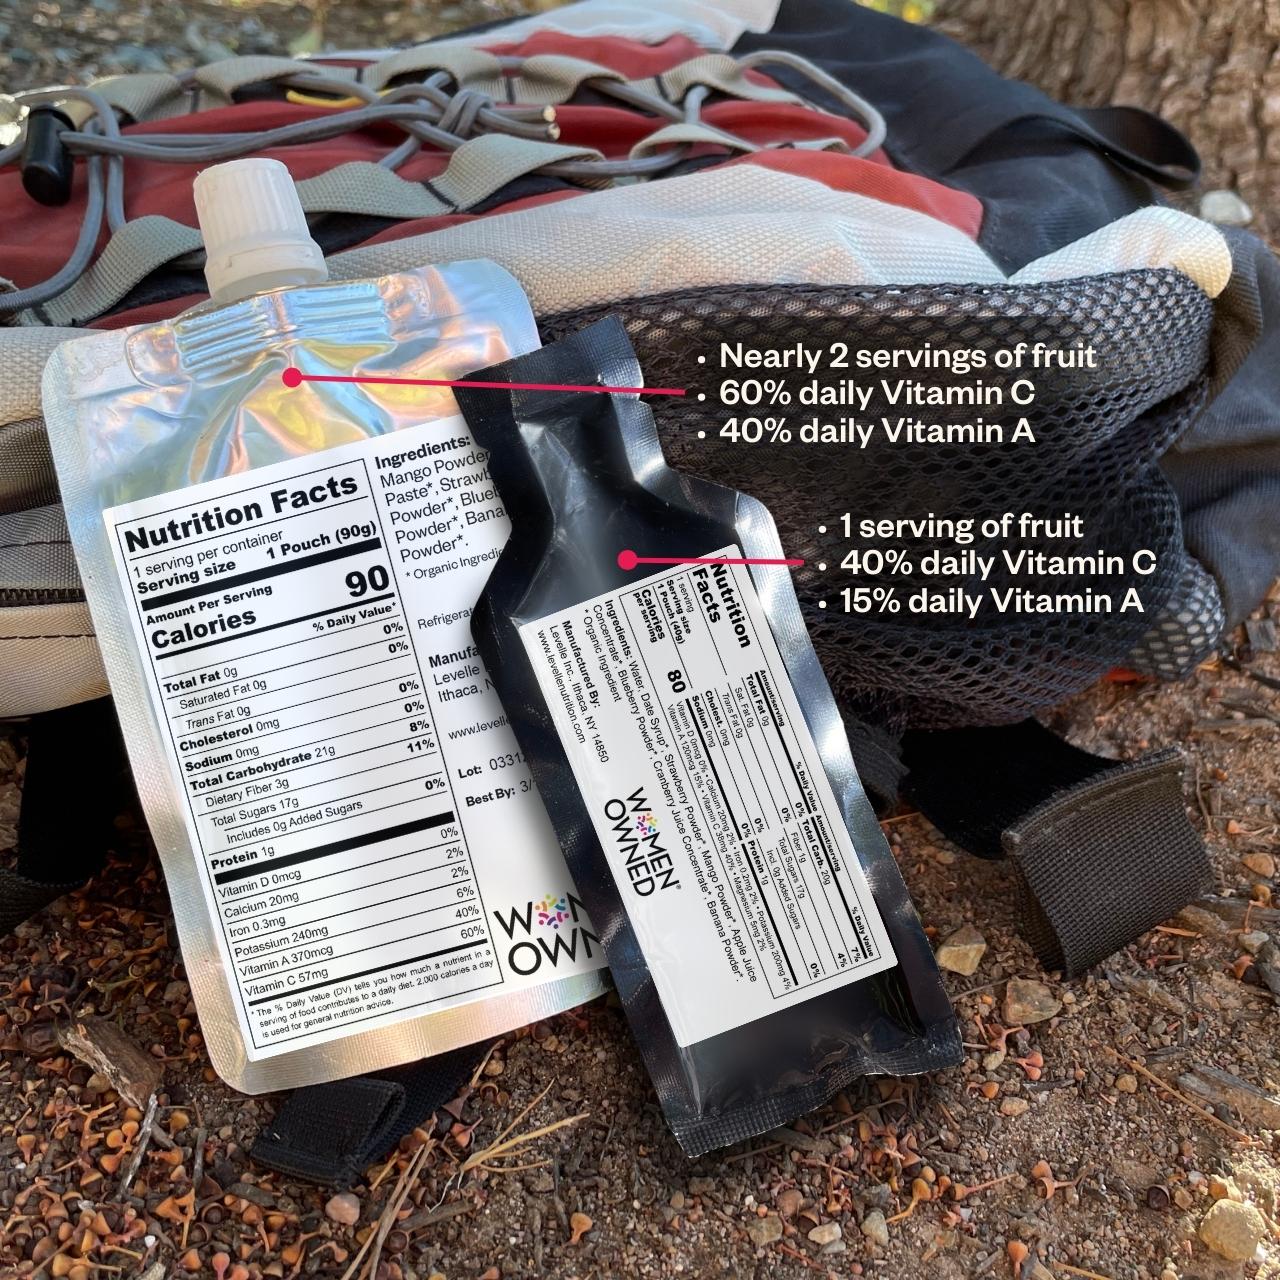 image of a backpack with two purees pouches with the nutrition facts panel showing